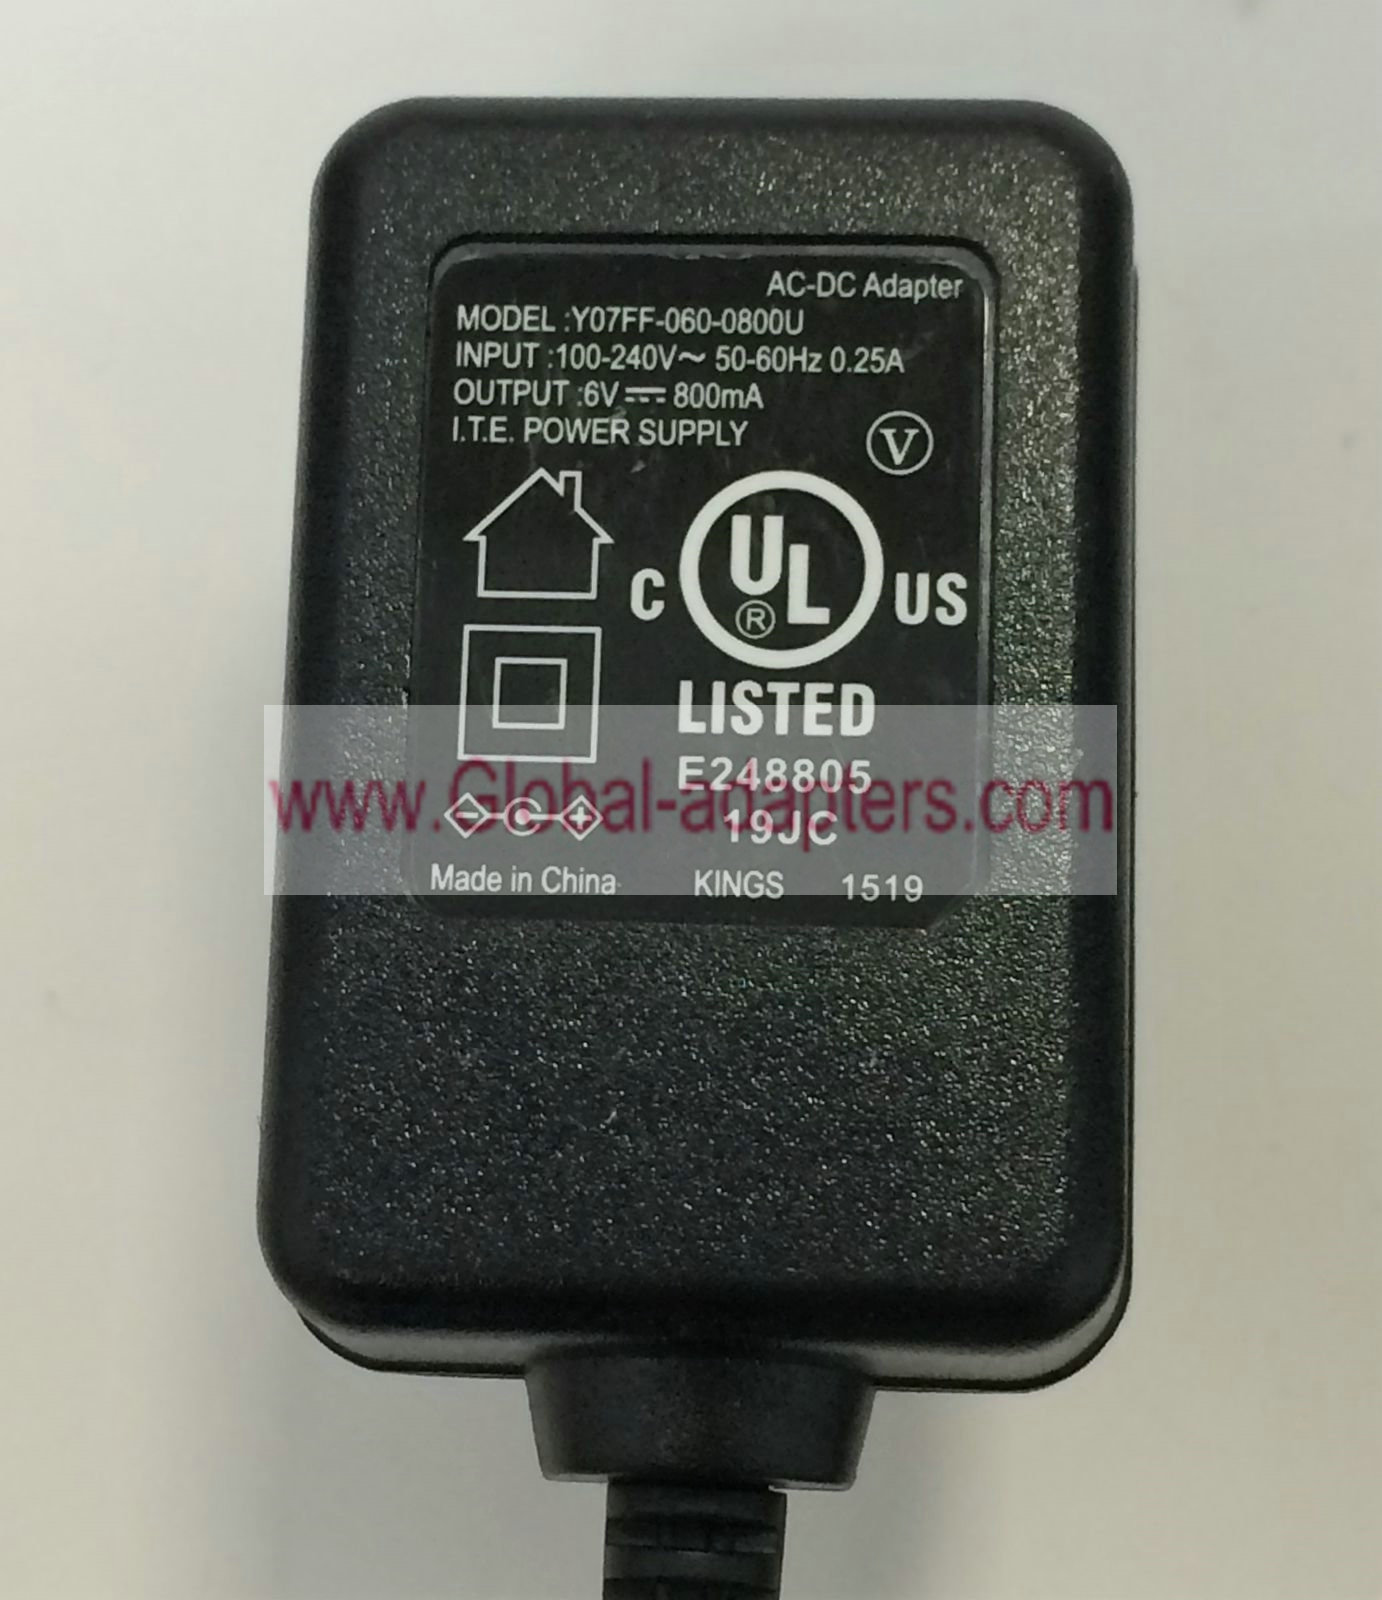 Brand New 6V 800mA AC/DC Adapter for Y07FF-060-0800U power supply - Click Image to Close